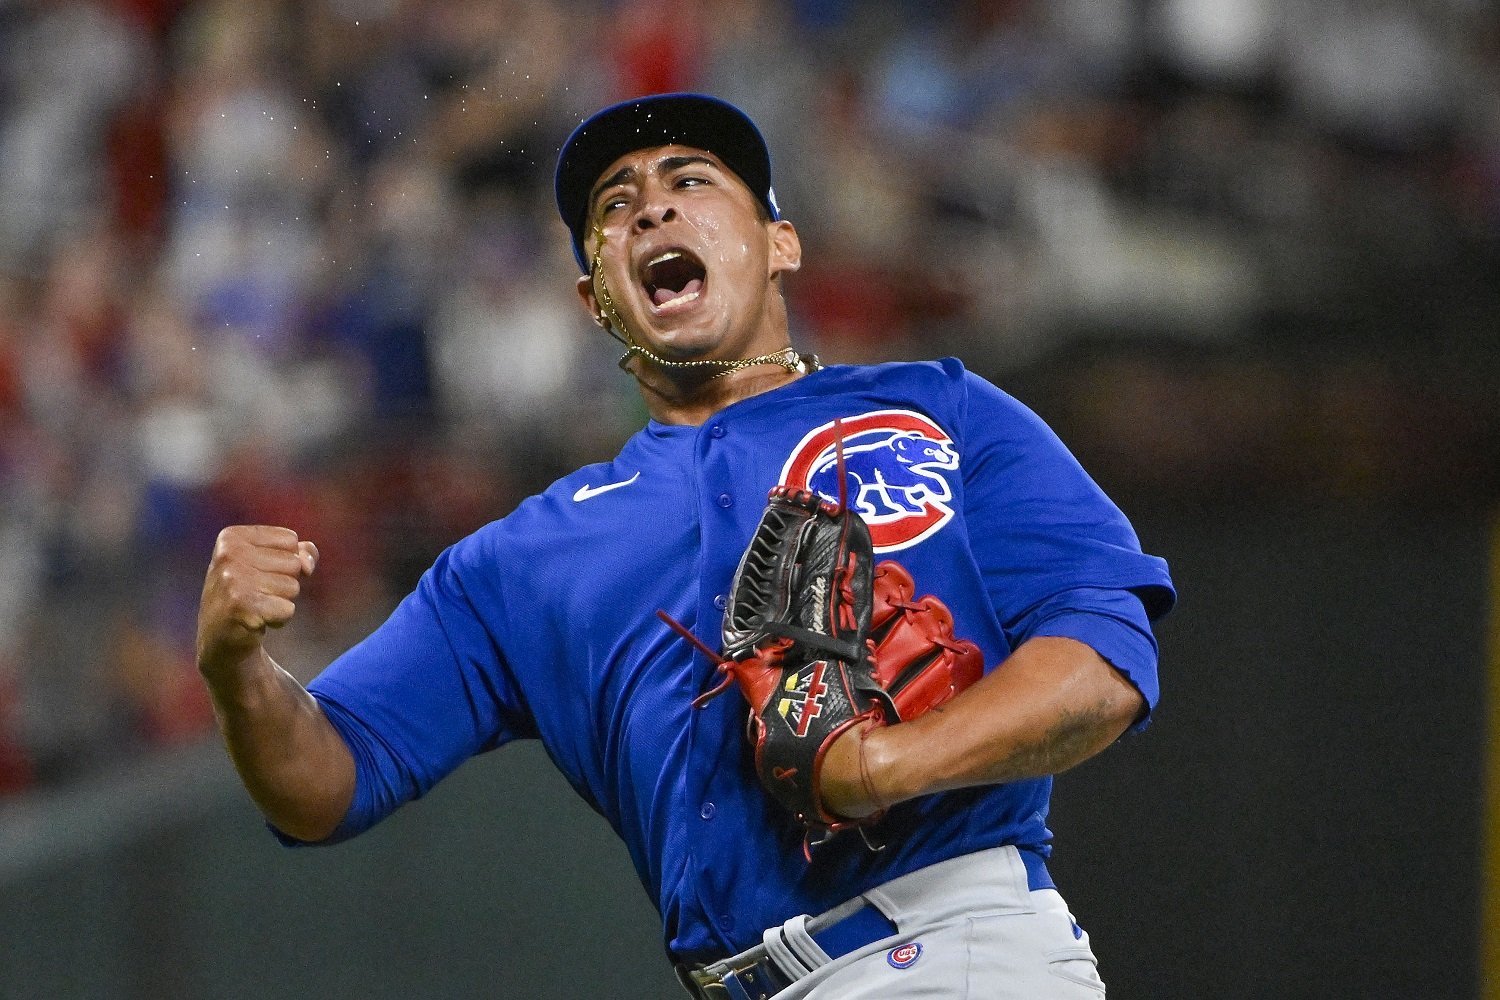 Chicago Cubs: Kyle Hendricks has put up some truly shocking numbers